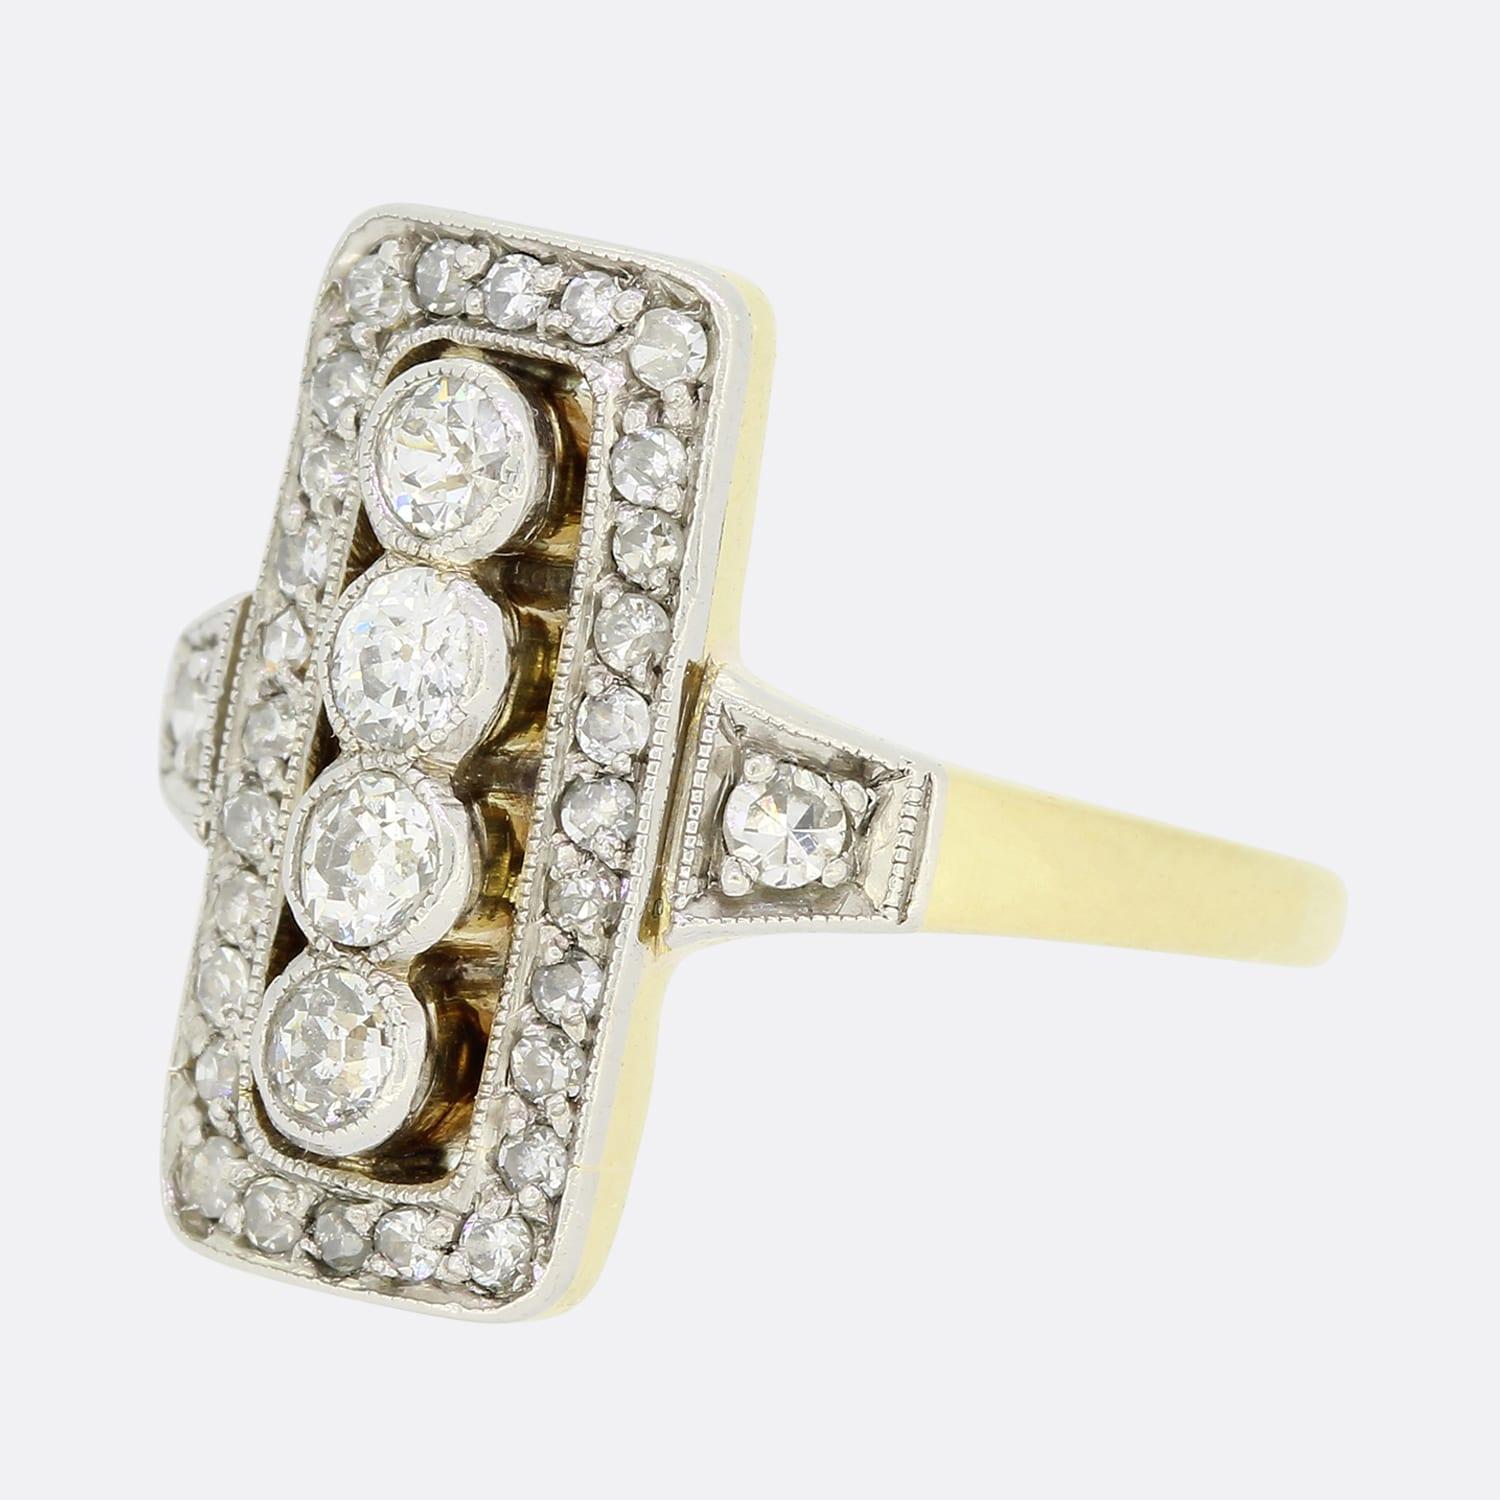 This is a lovely 18ct yellow gold Edwardian diamond tablet ring. The centre of the ring is formed of 4 old cut diamonds and surrounded by a border of sparkling single cut diamonds. The tablet style is a typical Edwardian look which has remained as